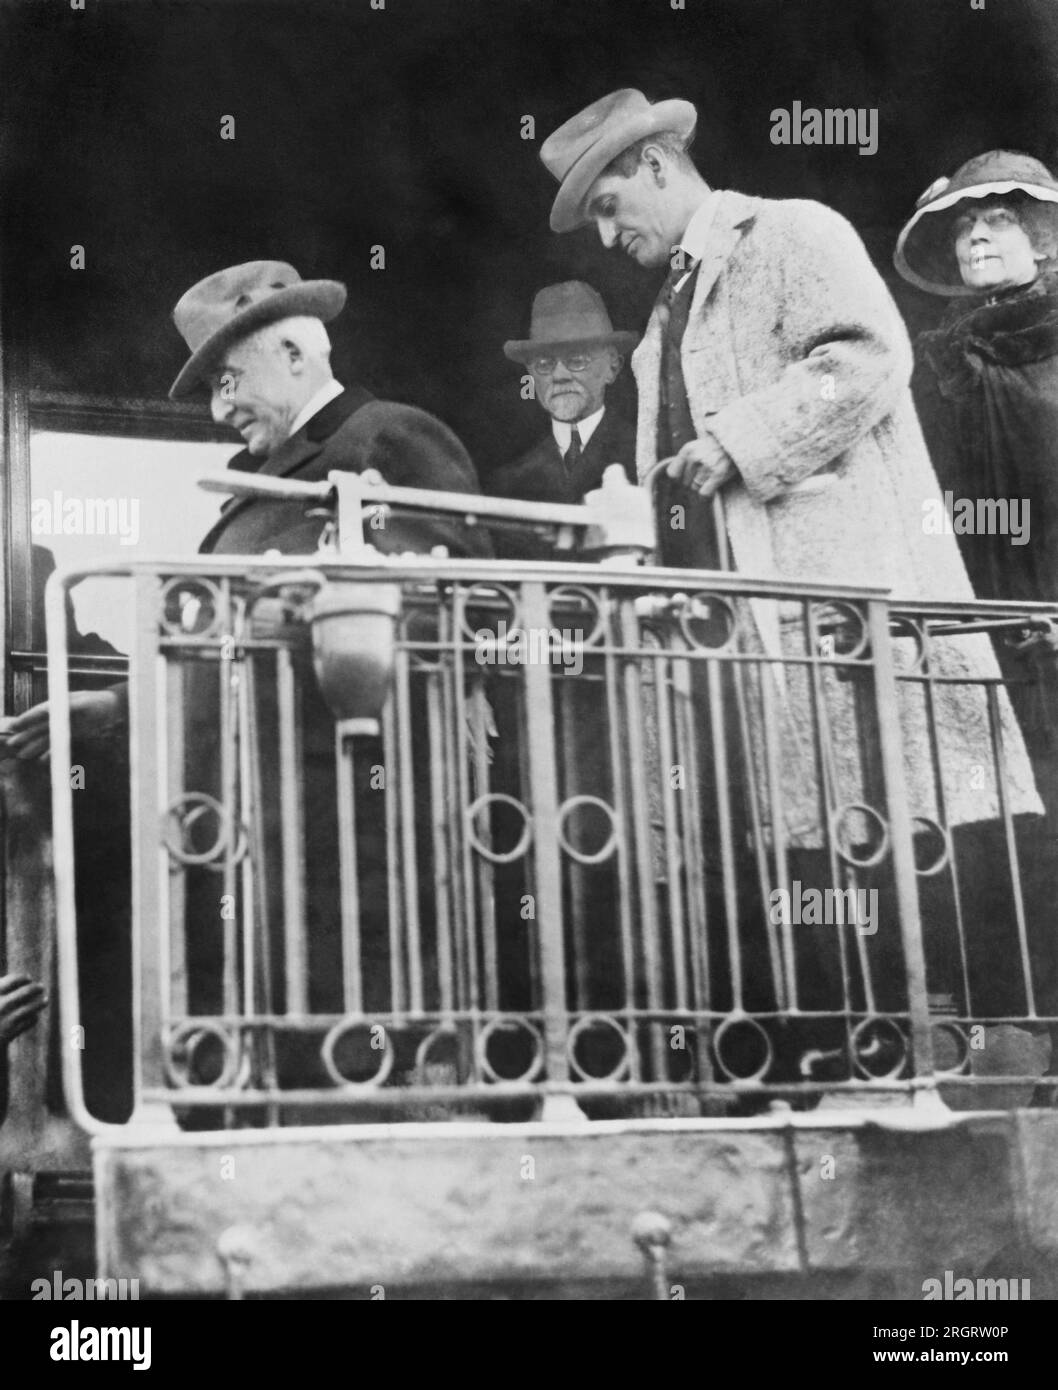 San Francisco, California:  August 3, 1923 President Harding along with Mrs. Harding, Brig. General Sawyer and Secretary Christian leaving the train on their way to the Palace Hotel in San Francisco where the President died the next day. Stock Photo